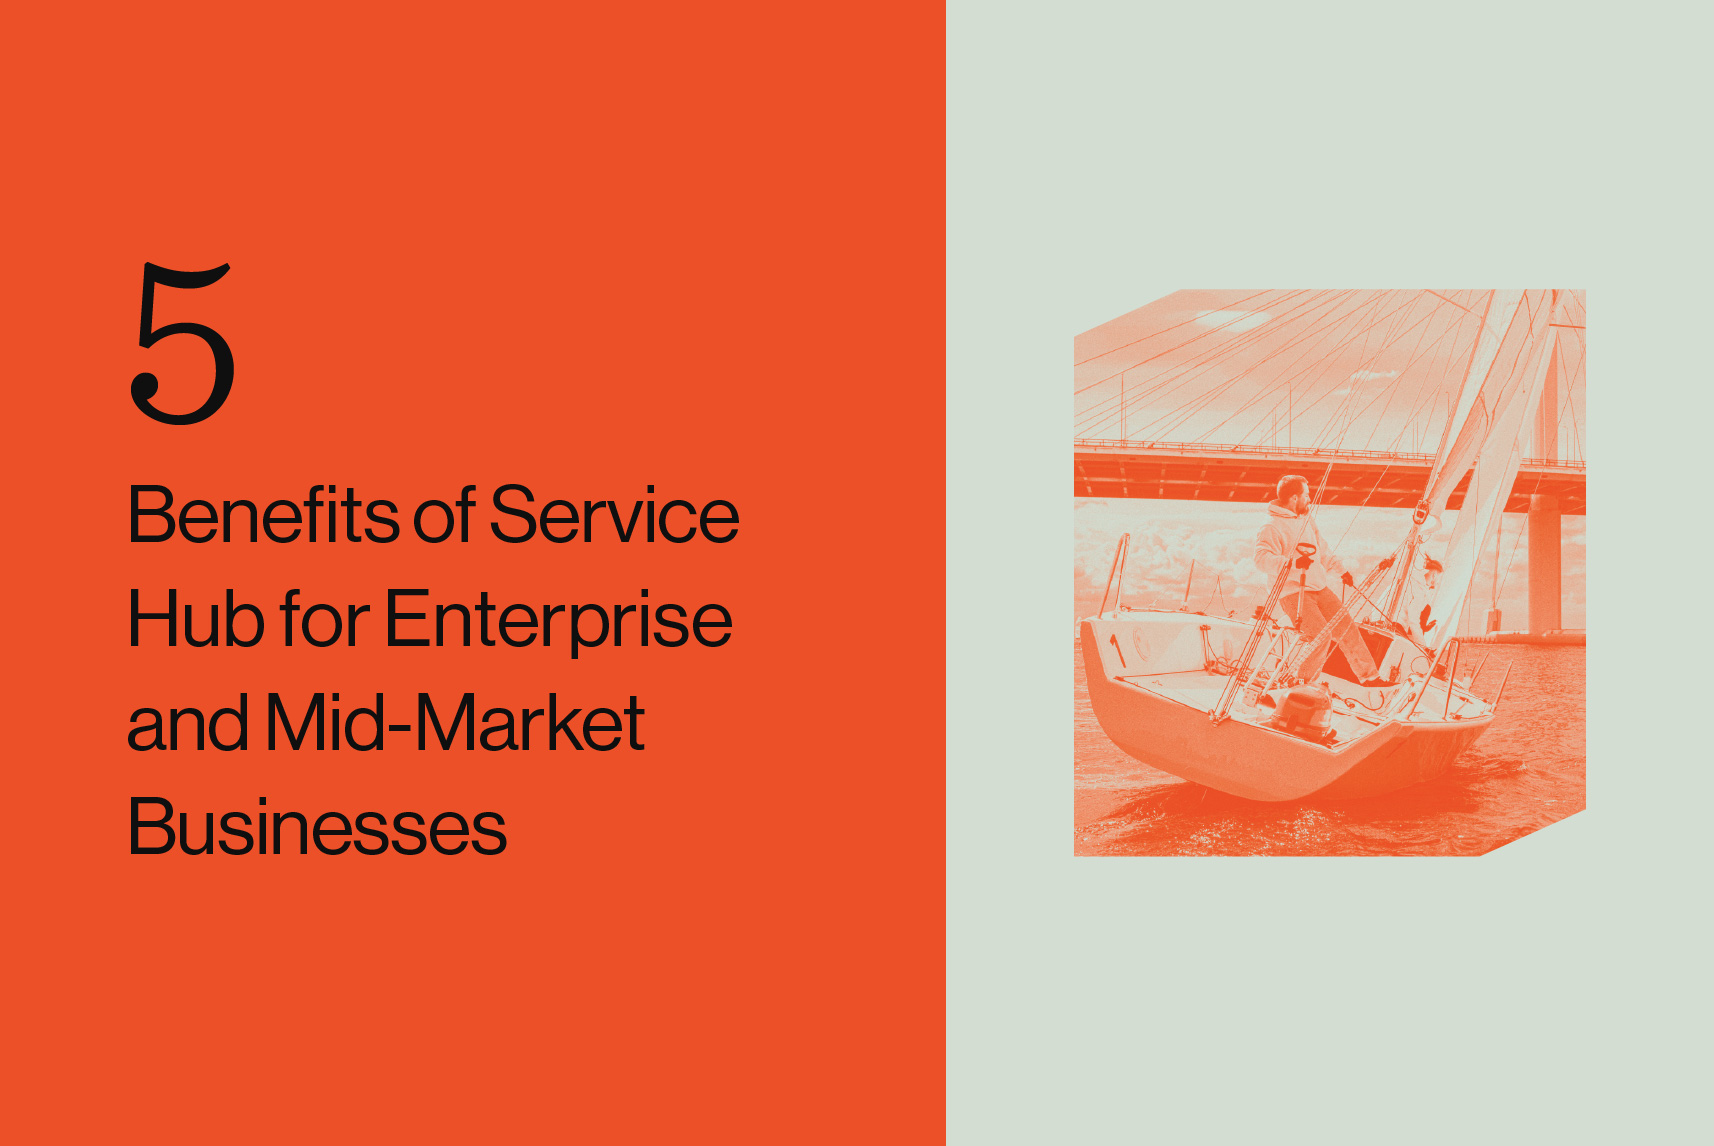 5 Benefits of Service Hub for Enterprise and Mid-Market Businesses